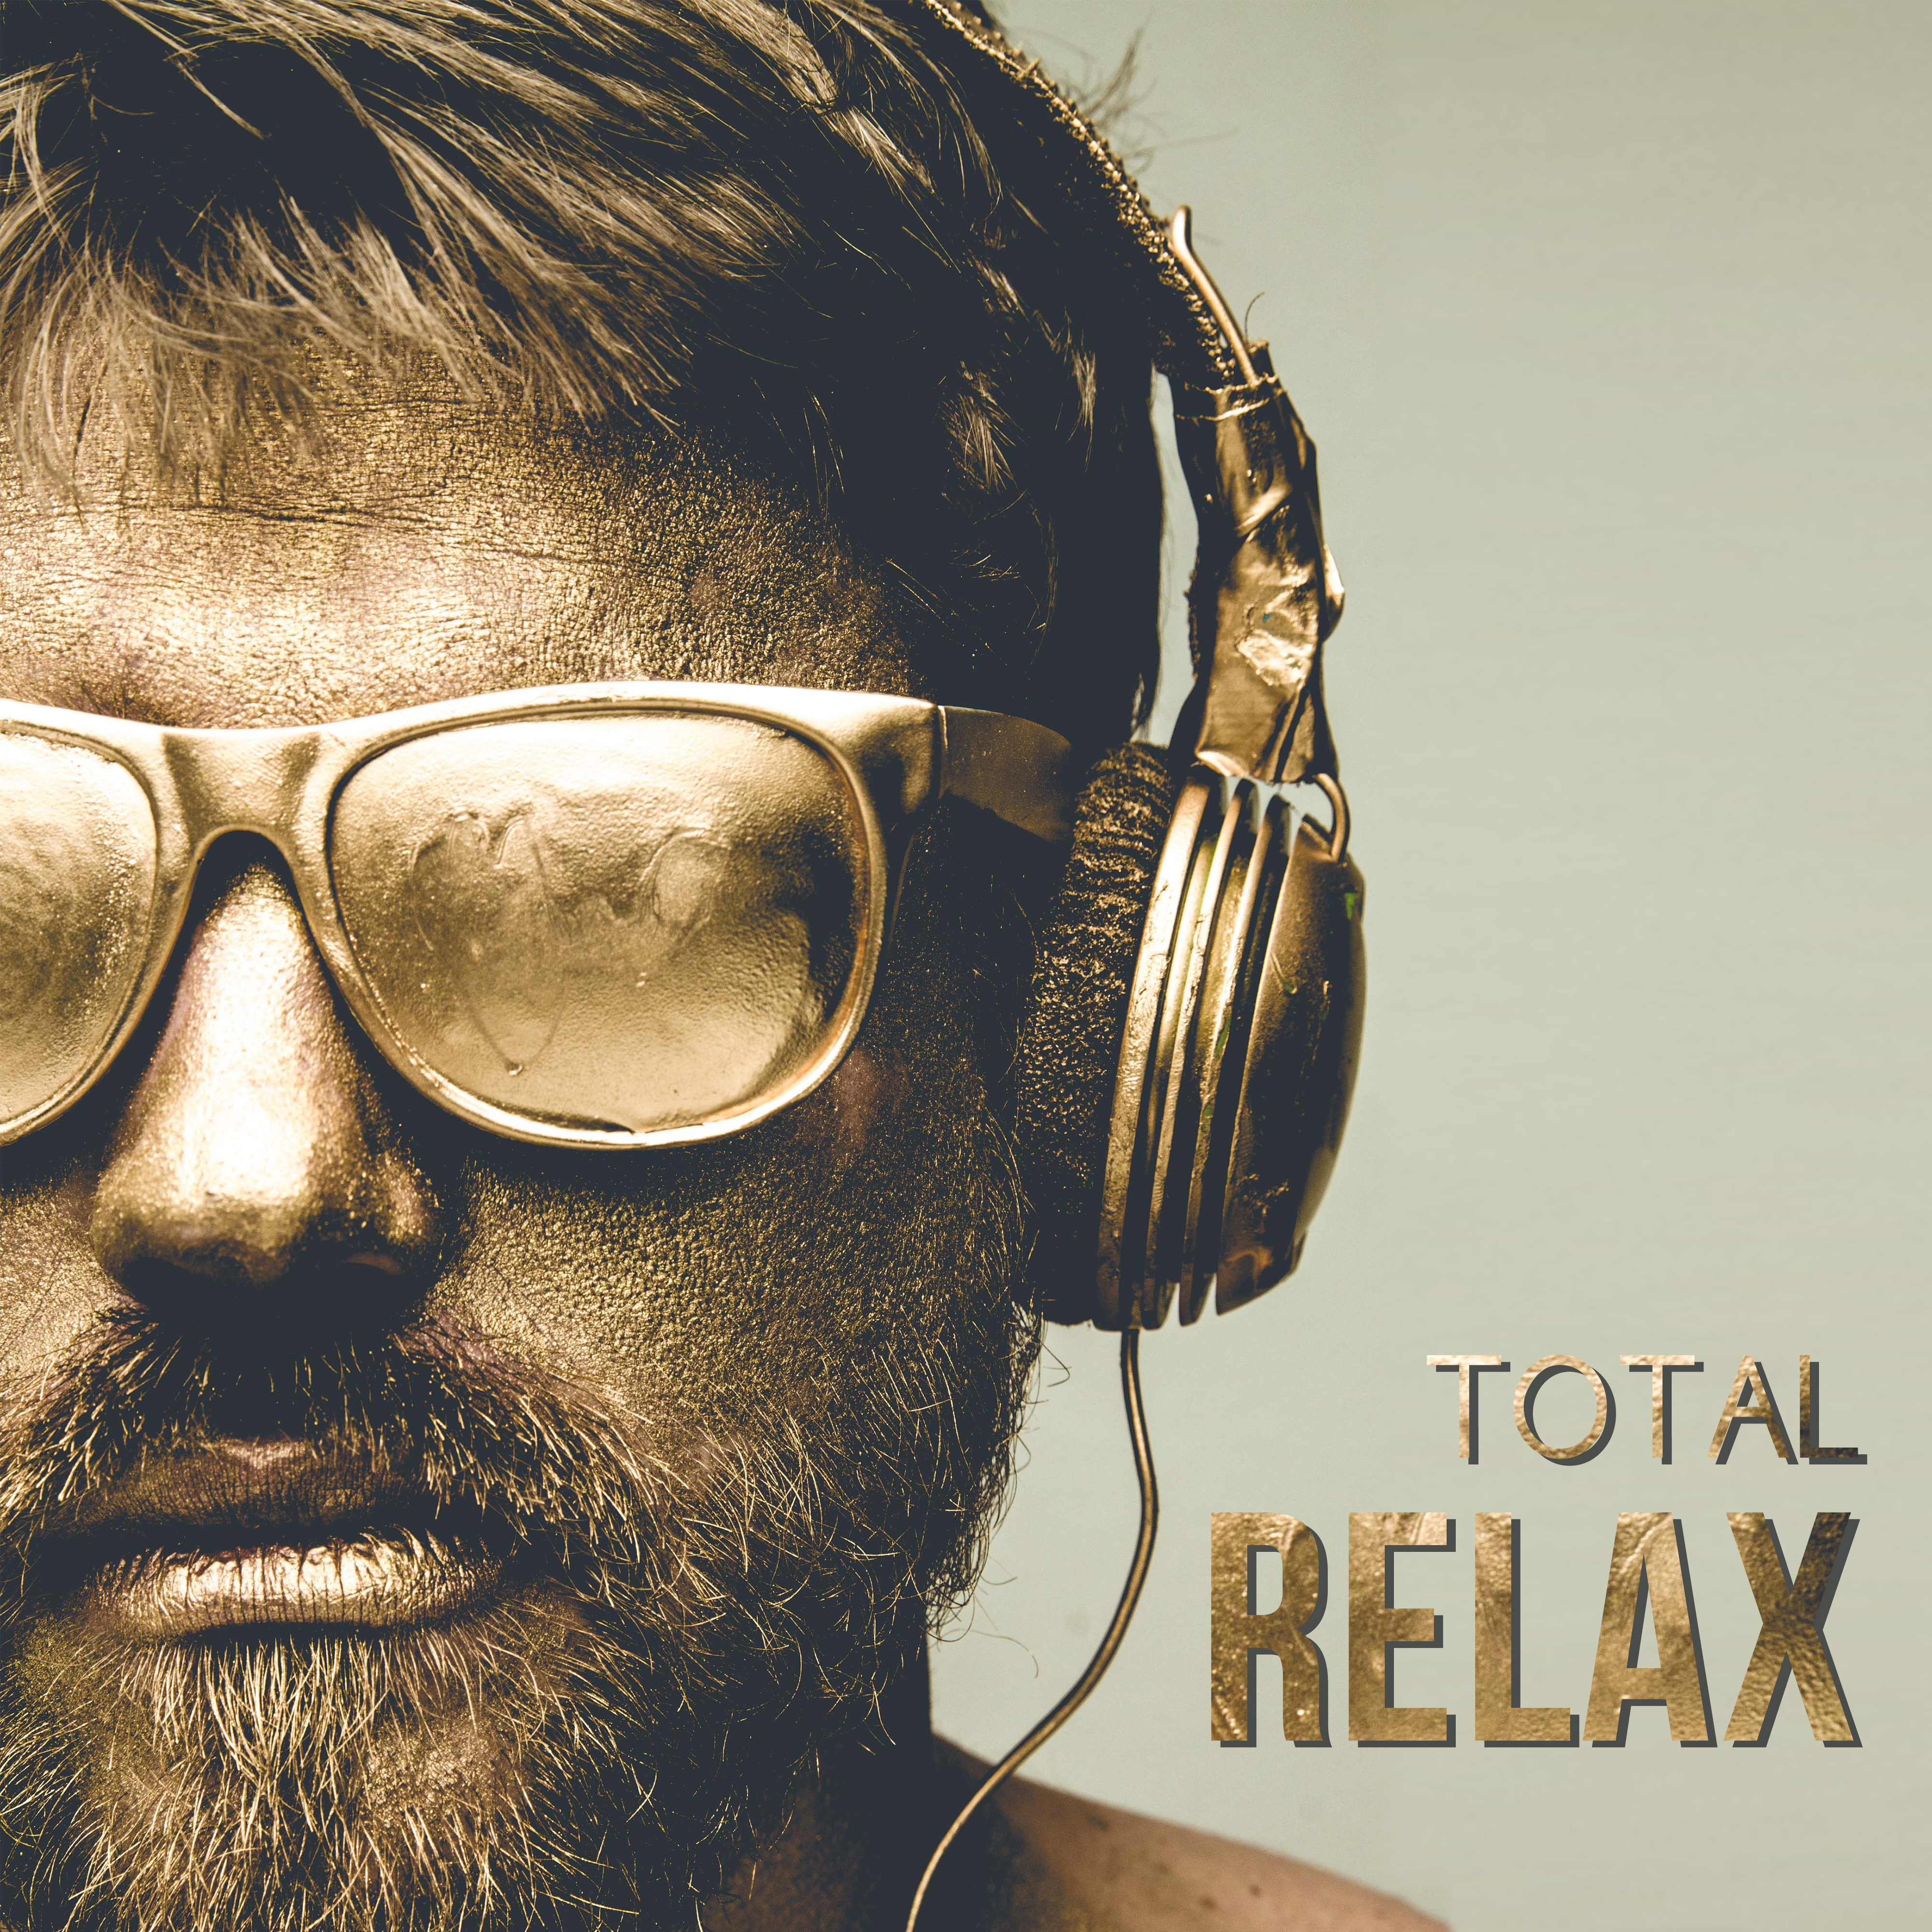 Total Relax – Summer Music, Deep Beats, Ibiza Lounge, Relaxation, Stress Relief, Holiday Chill Out Music, Beach Chill